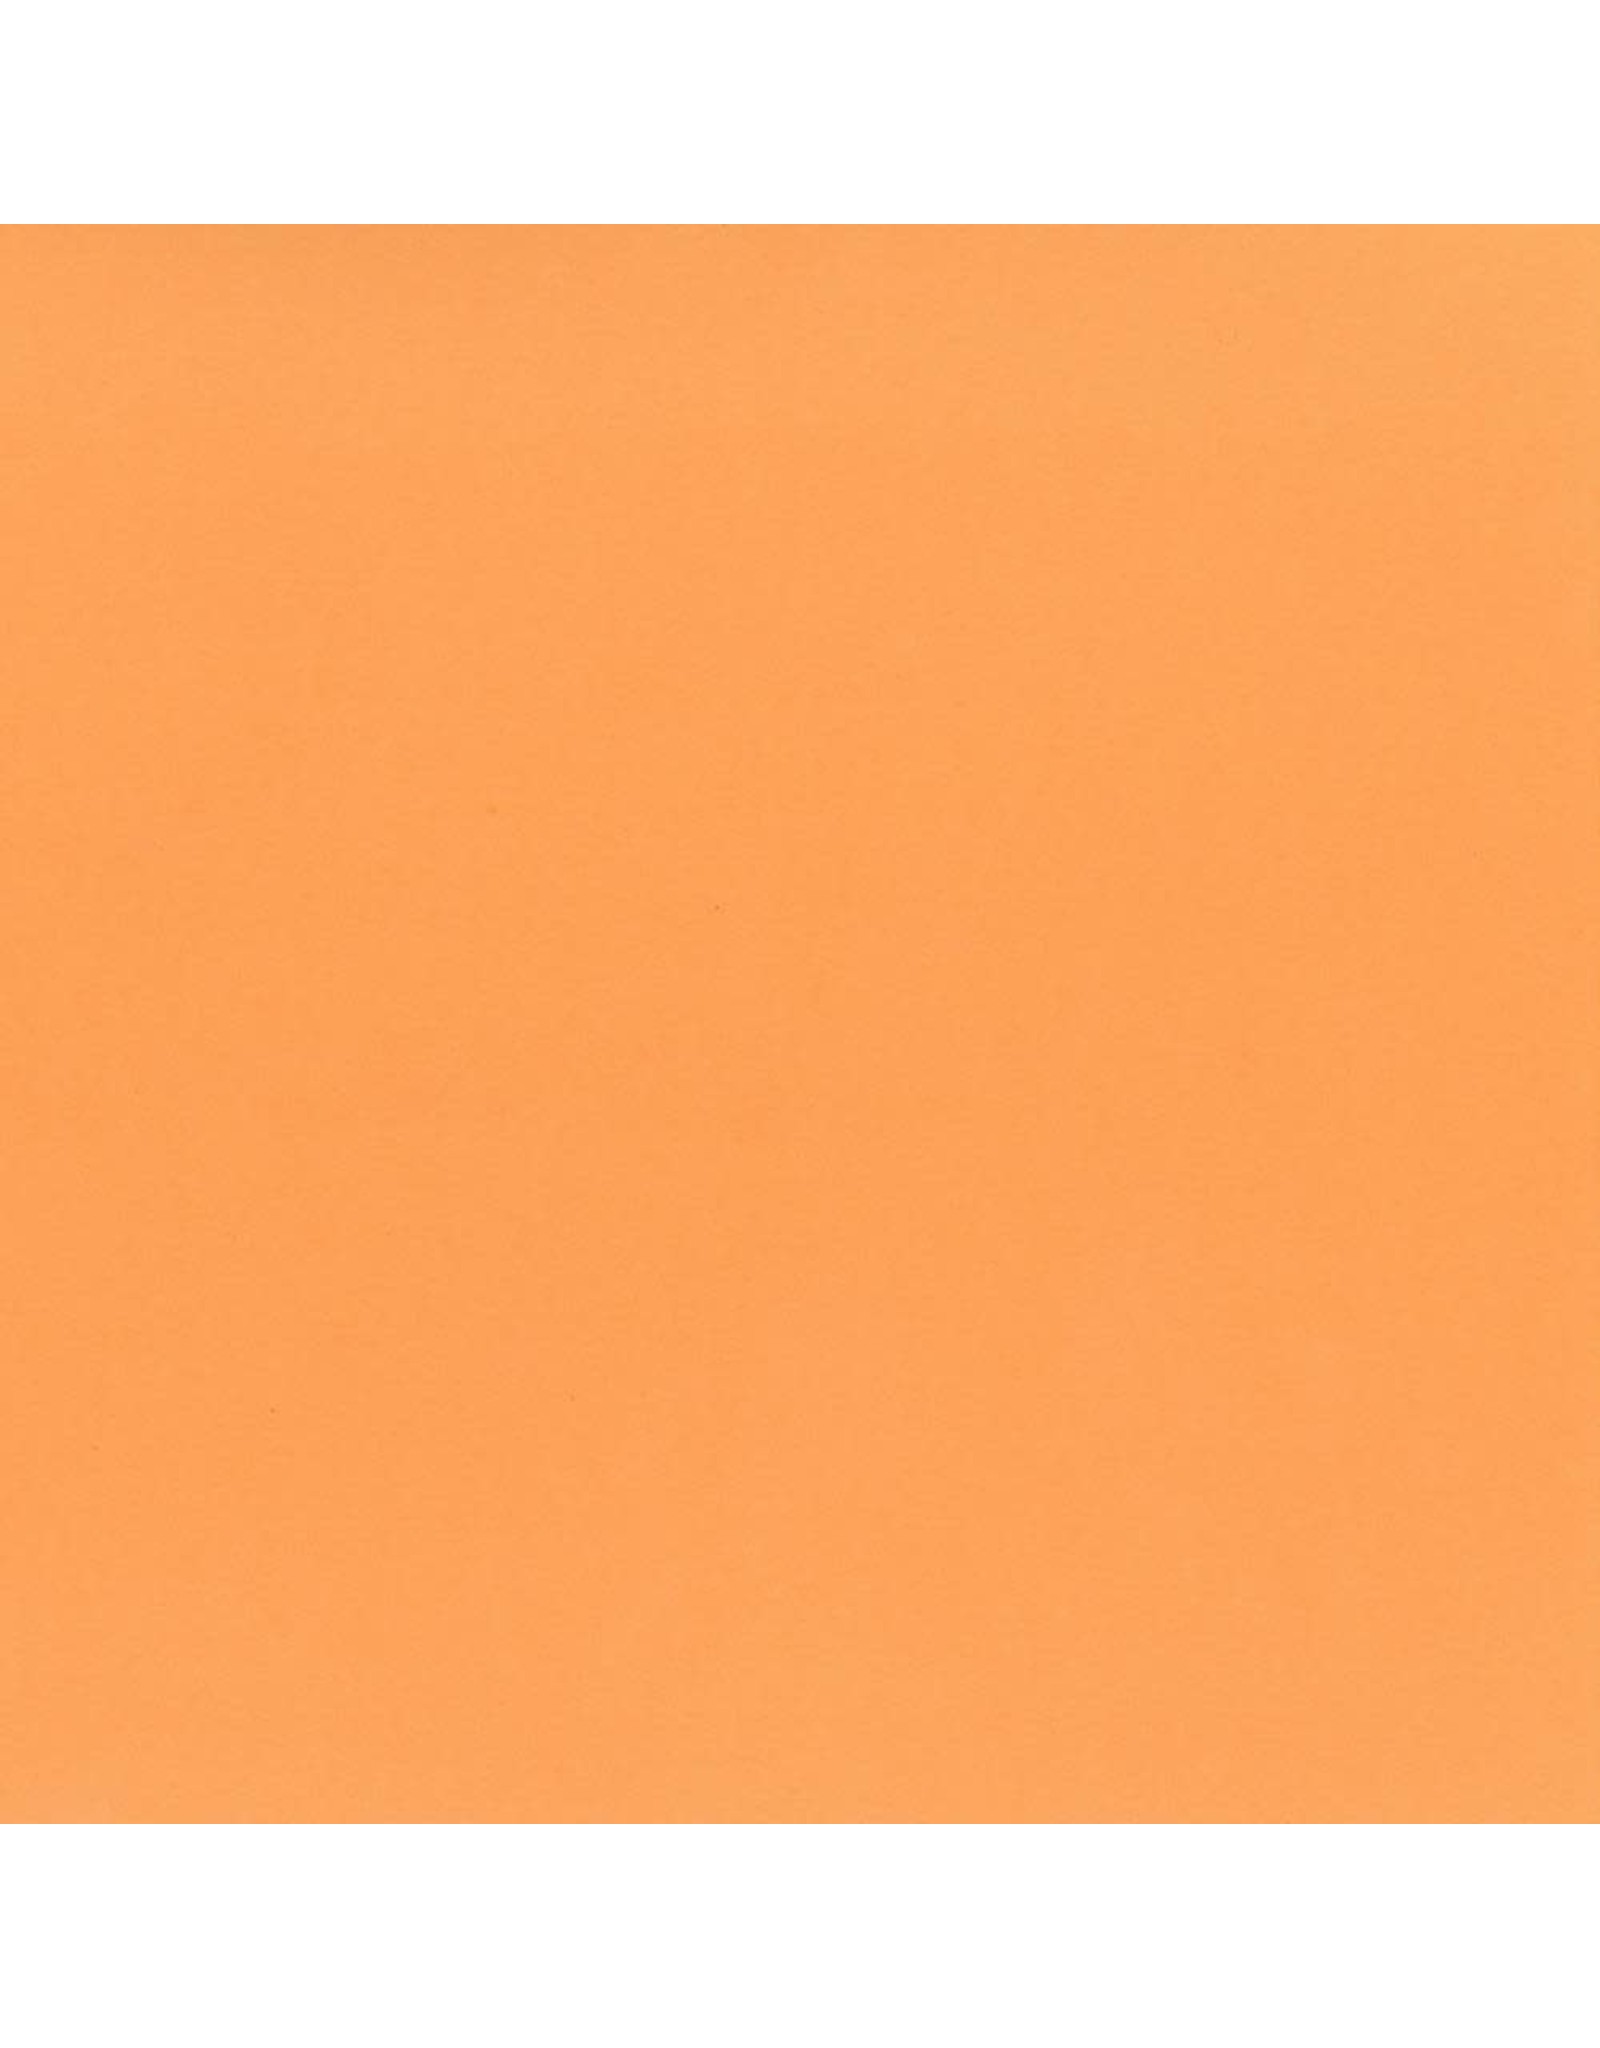 MY COLORS MY COLORS CLASSIC 80 LB COVER WEIGHT ORANGE SHERBET 12x12 CARDSTOCK